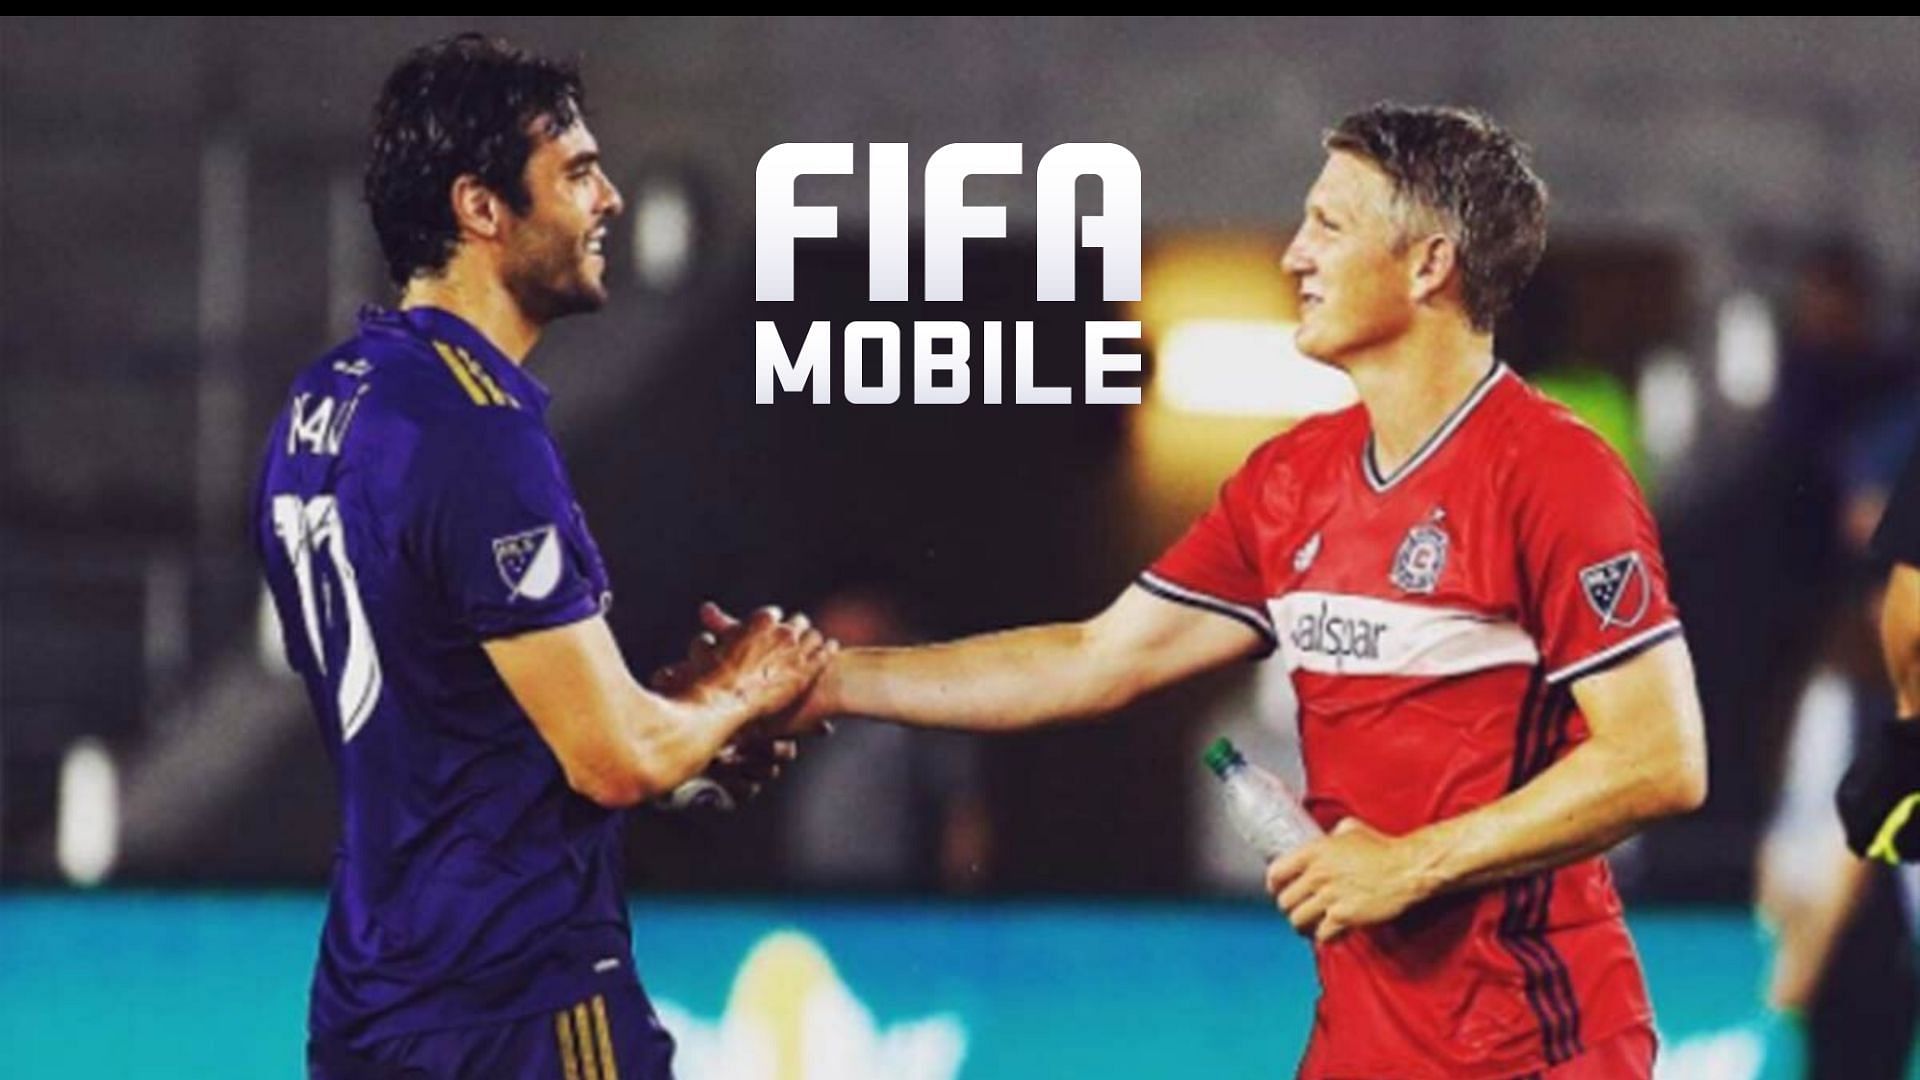 Kaka and Schweinsteiger are the latest additions to FIFA Mobile